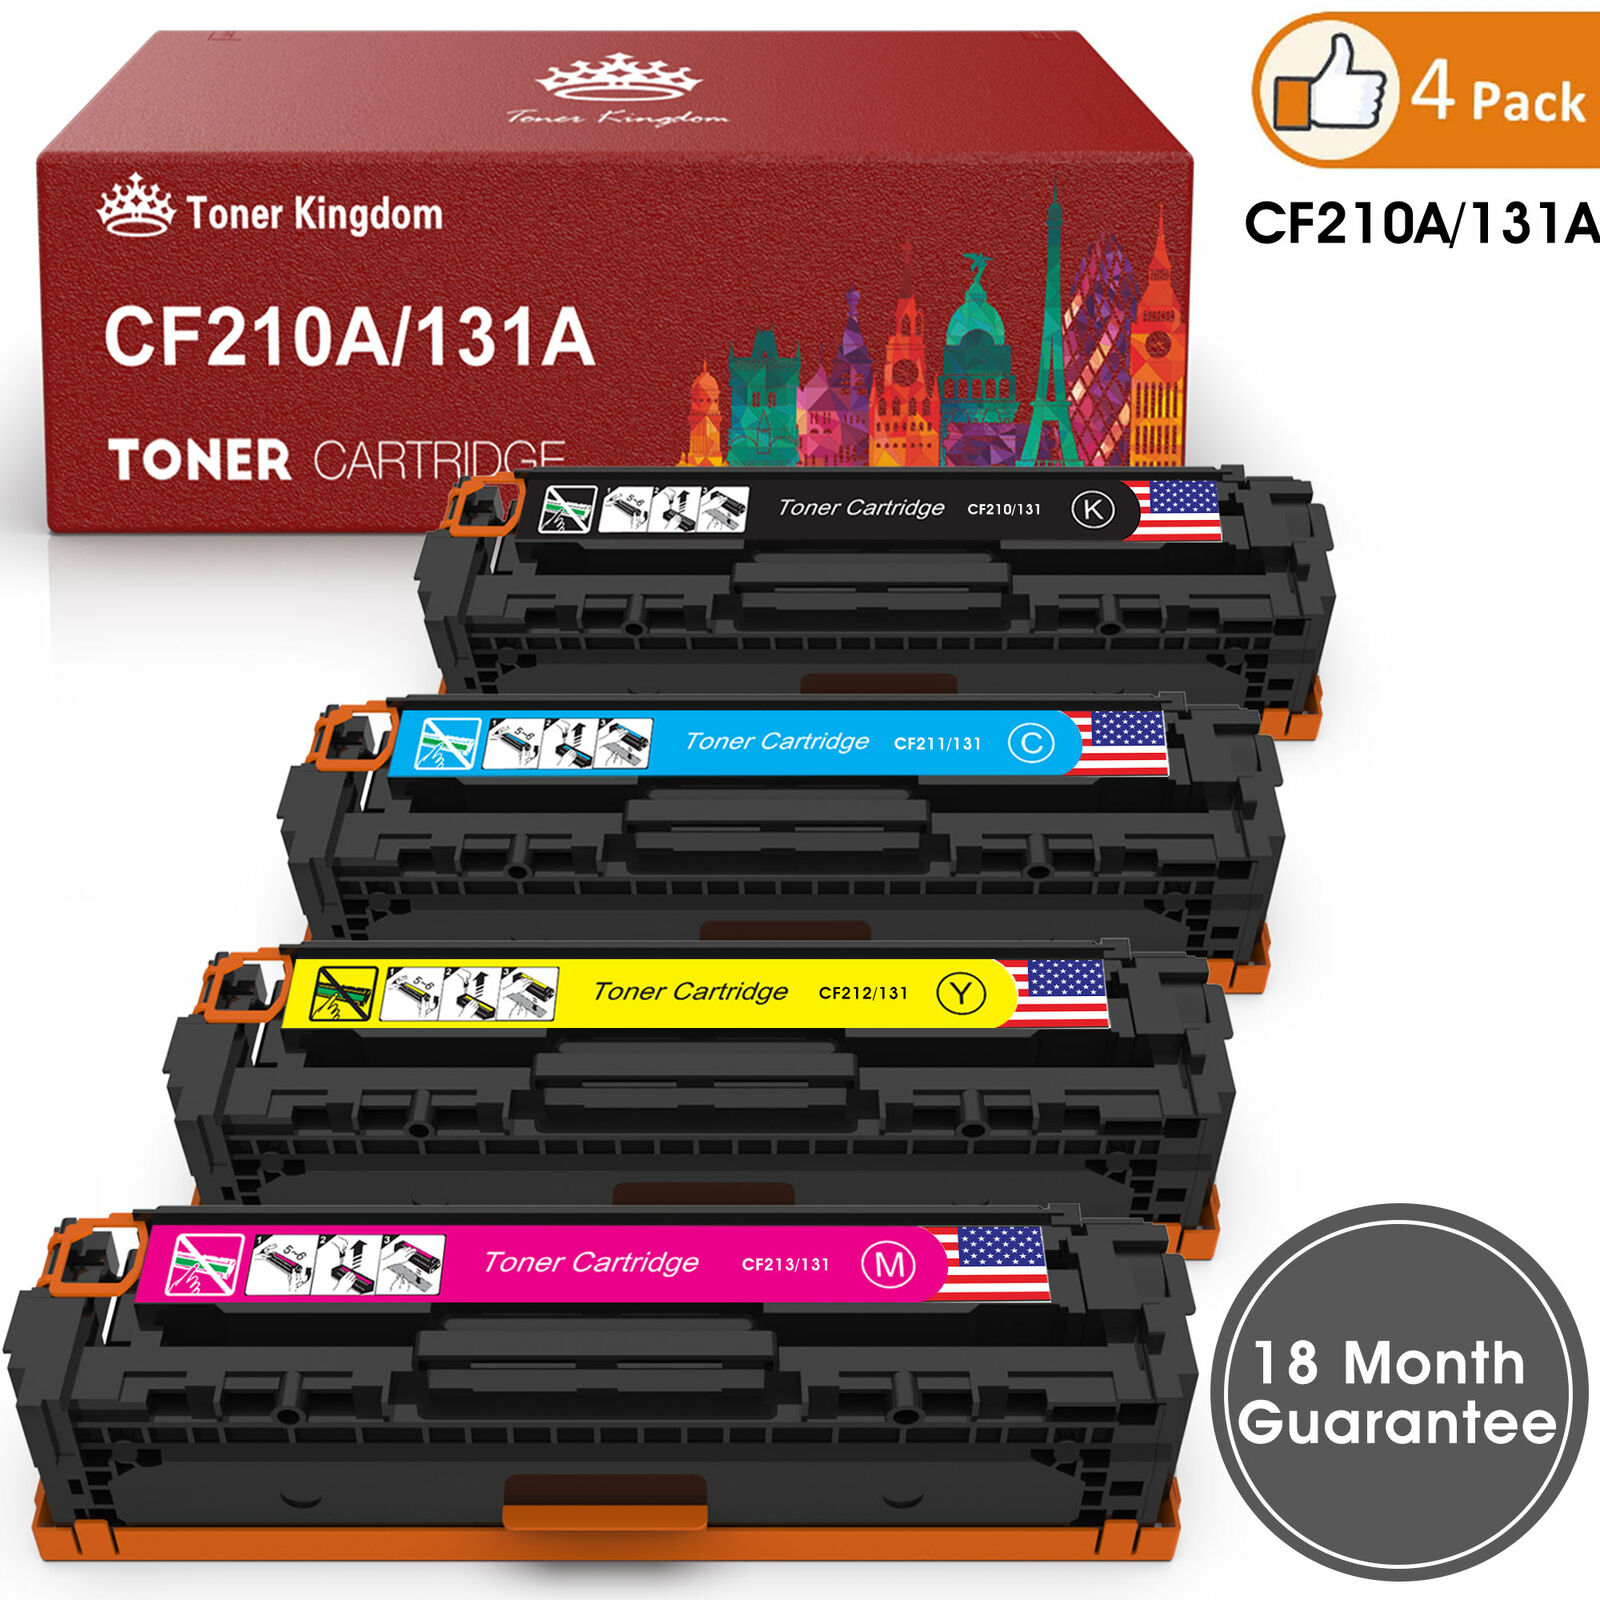 4Pack CF210A Toner Cartridge For HP 131A LaserJet Pro 200 M251nw MFP M276nw M251